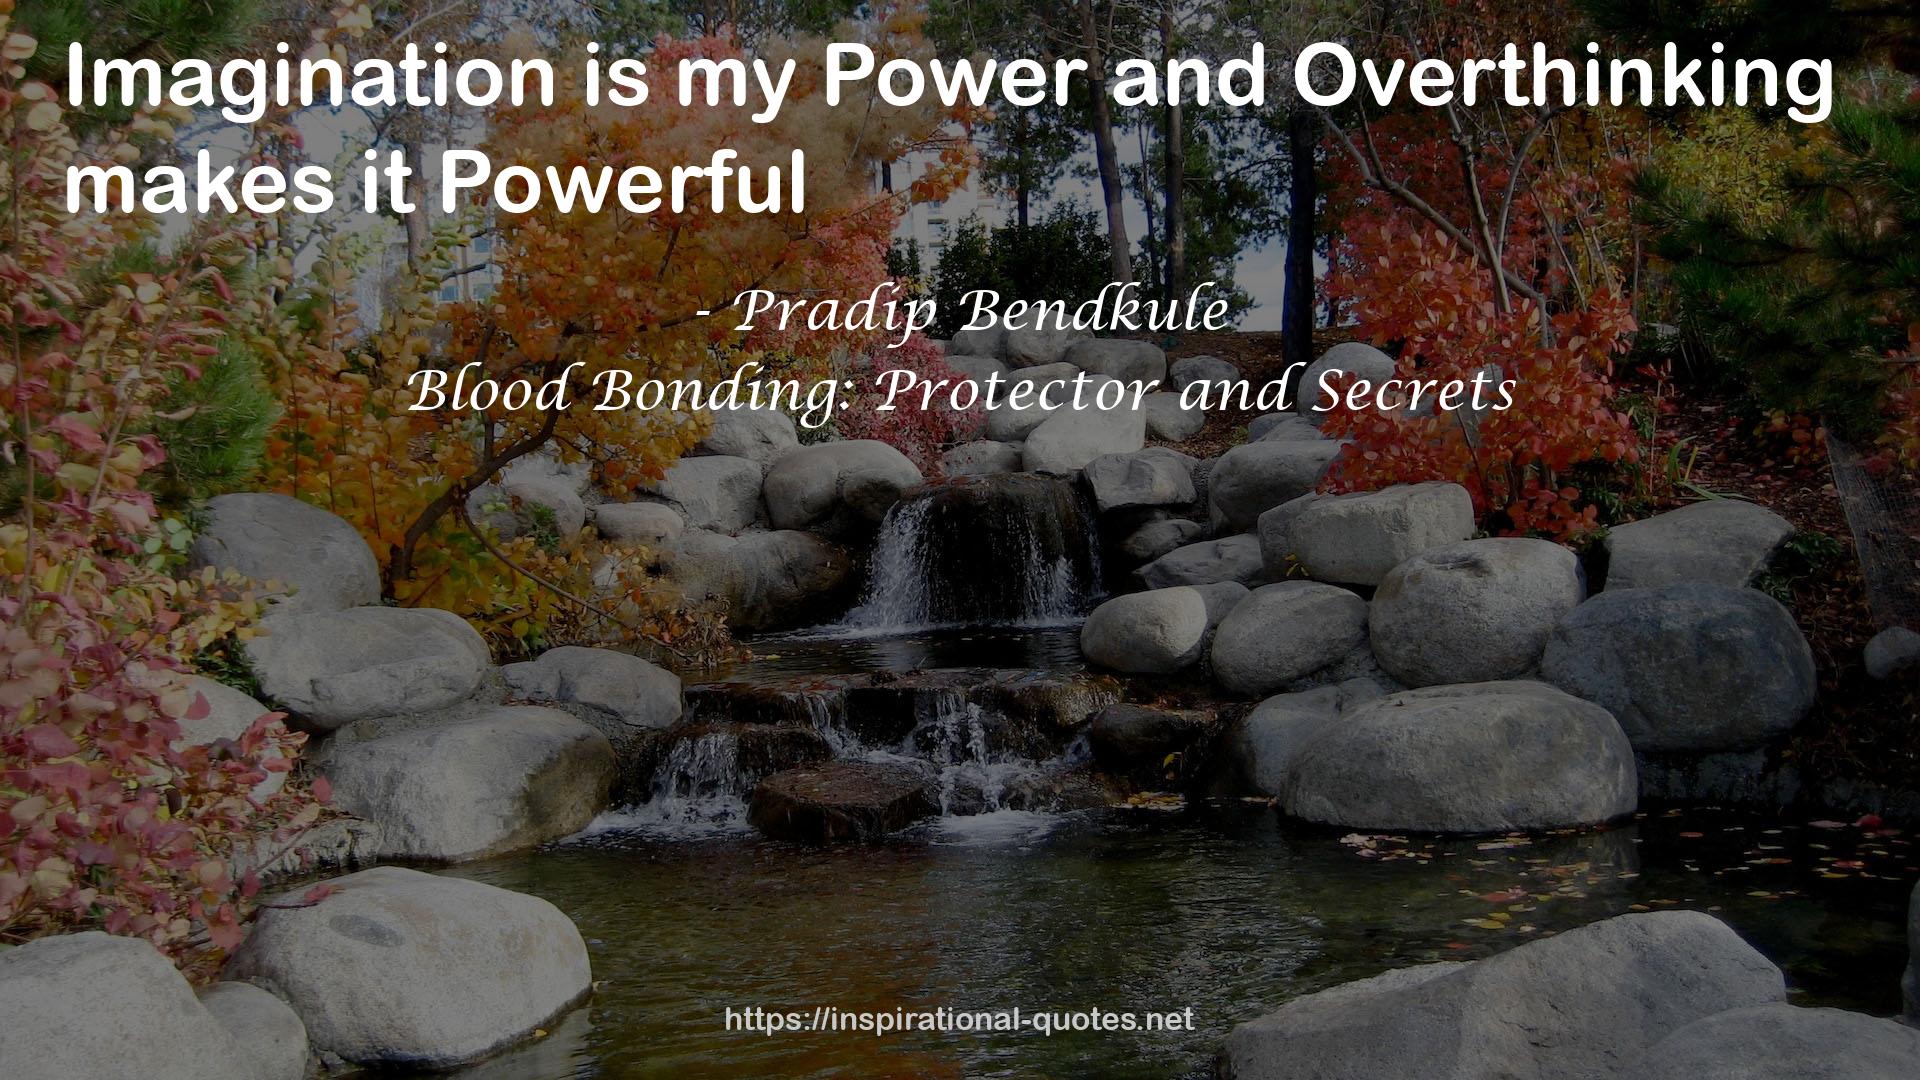 Blood Bonding: Protector and Secrets QUOTES